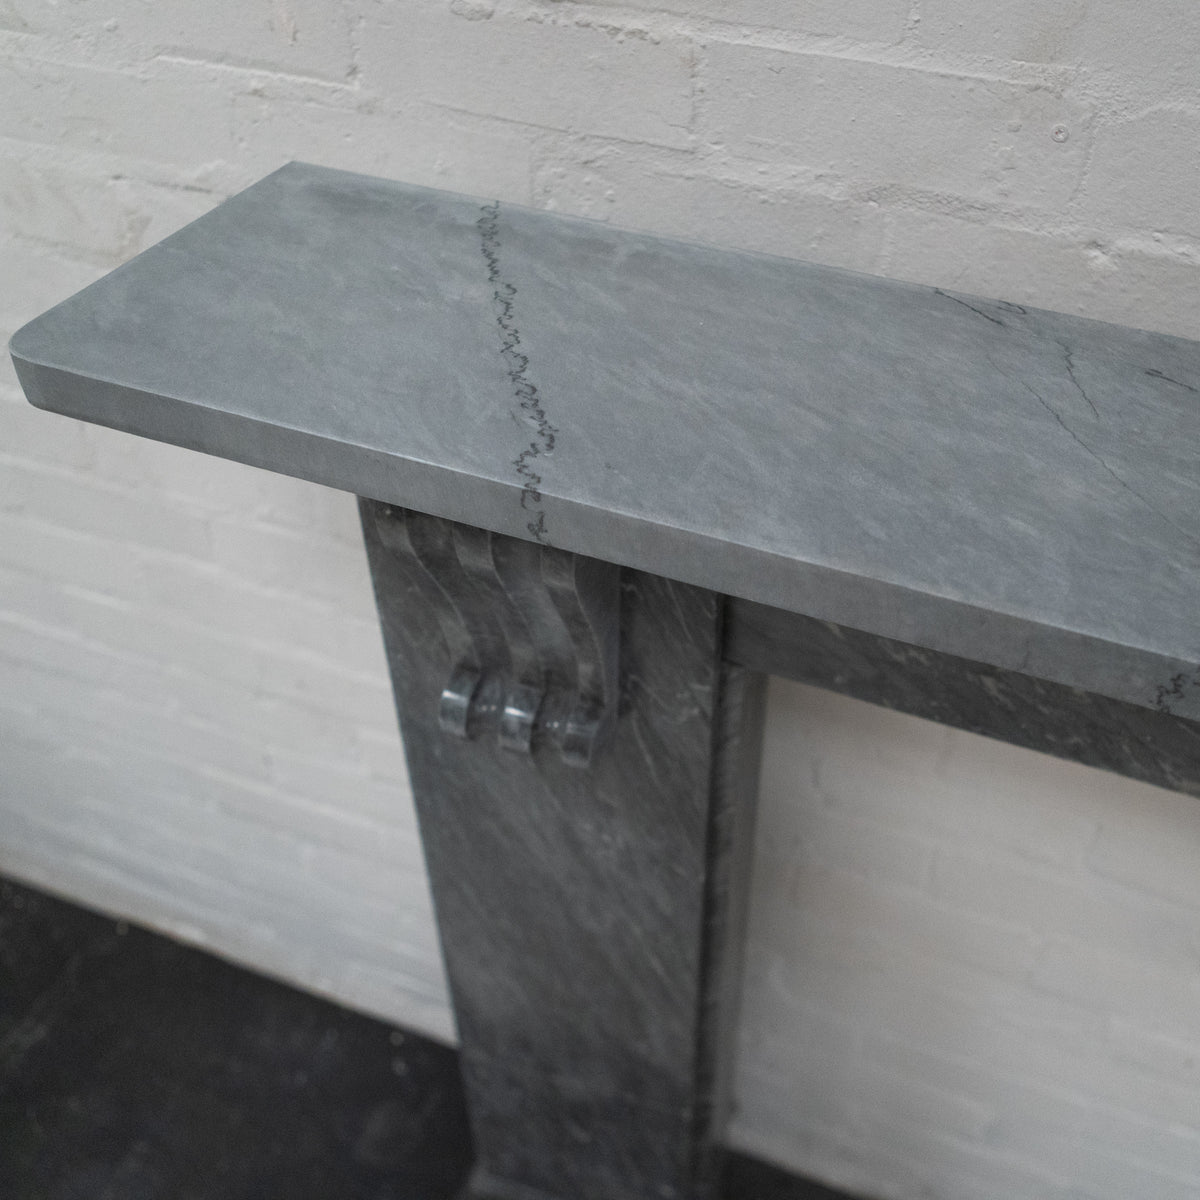 Antique Dove Grey Marble Fireplace Surround with Corbels | The Architectural Forum